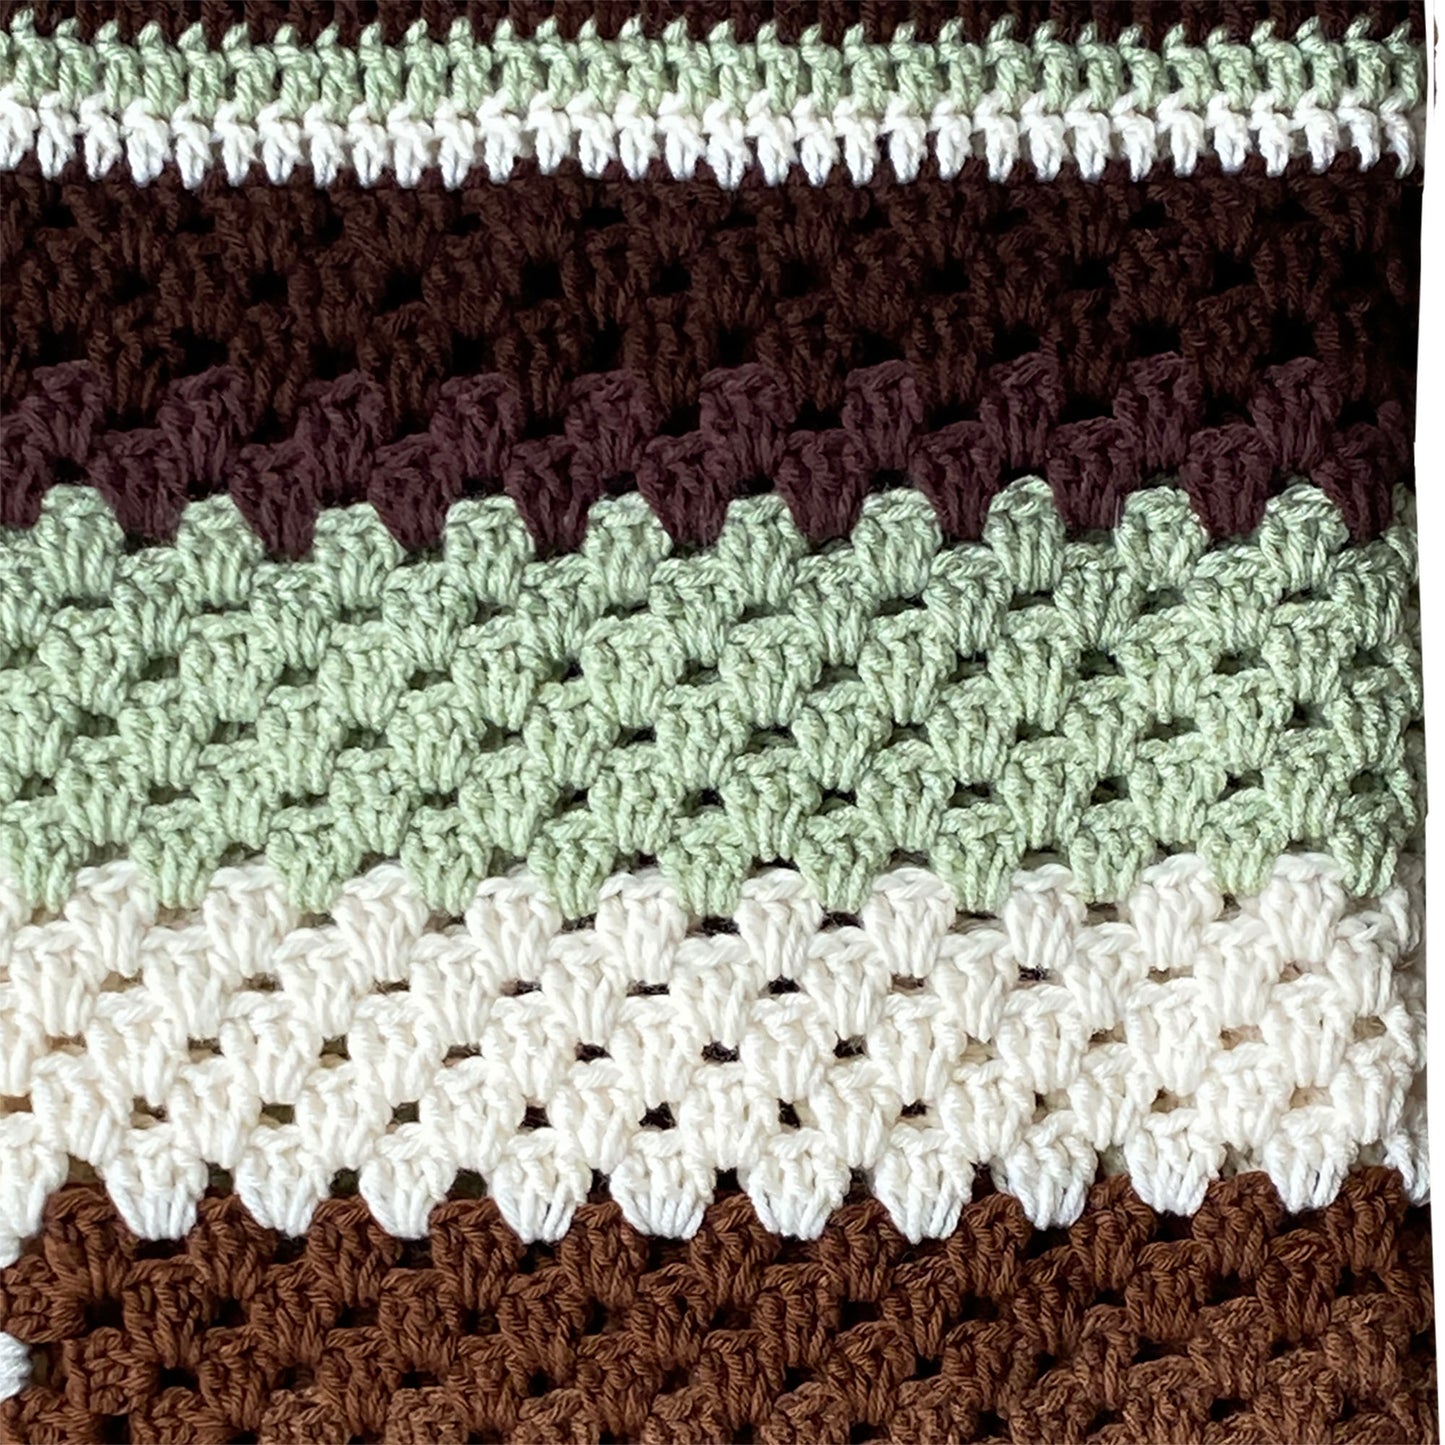 Brown_-Green-White-Crocheted-Blanket_-Square.-Close-up-view.-Shop-eBargainsAndDeals.com